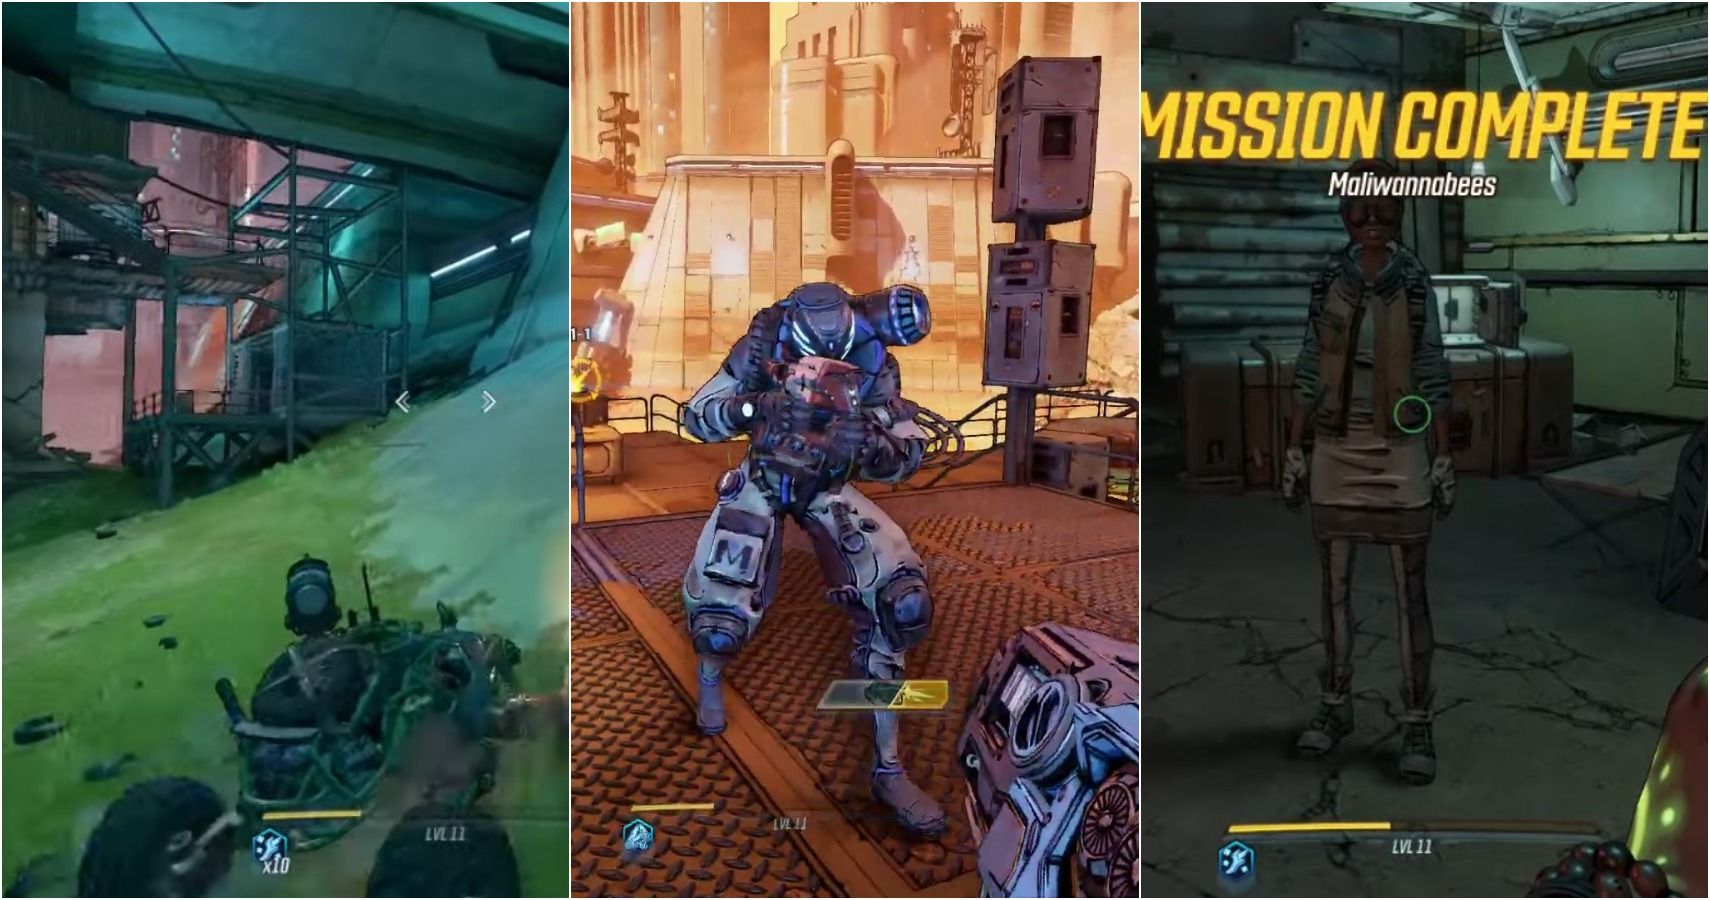 Borderlands 3 Maliwannabees split image of car, Rax, and Ziff mission complete